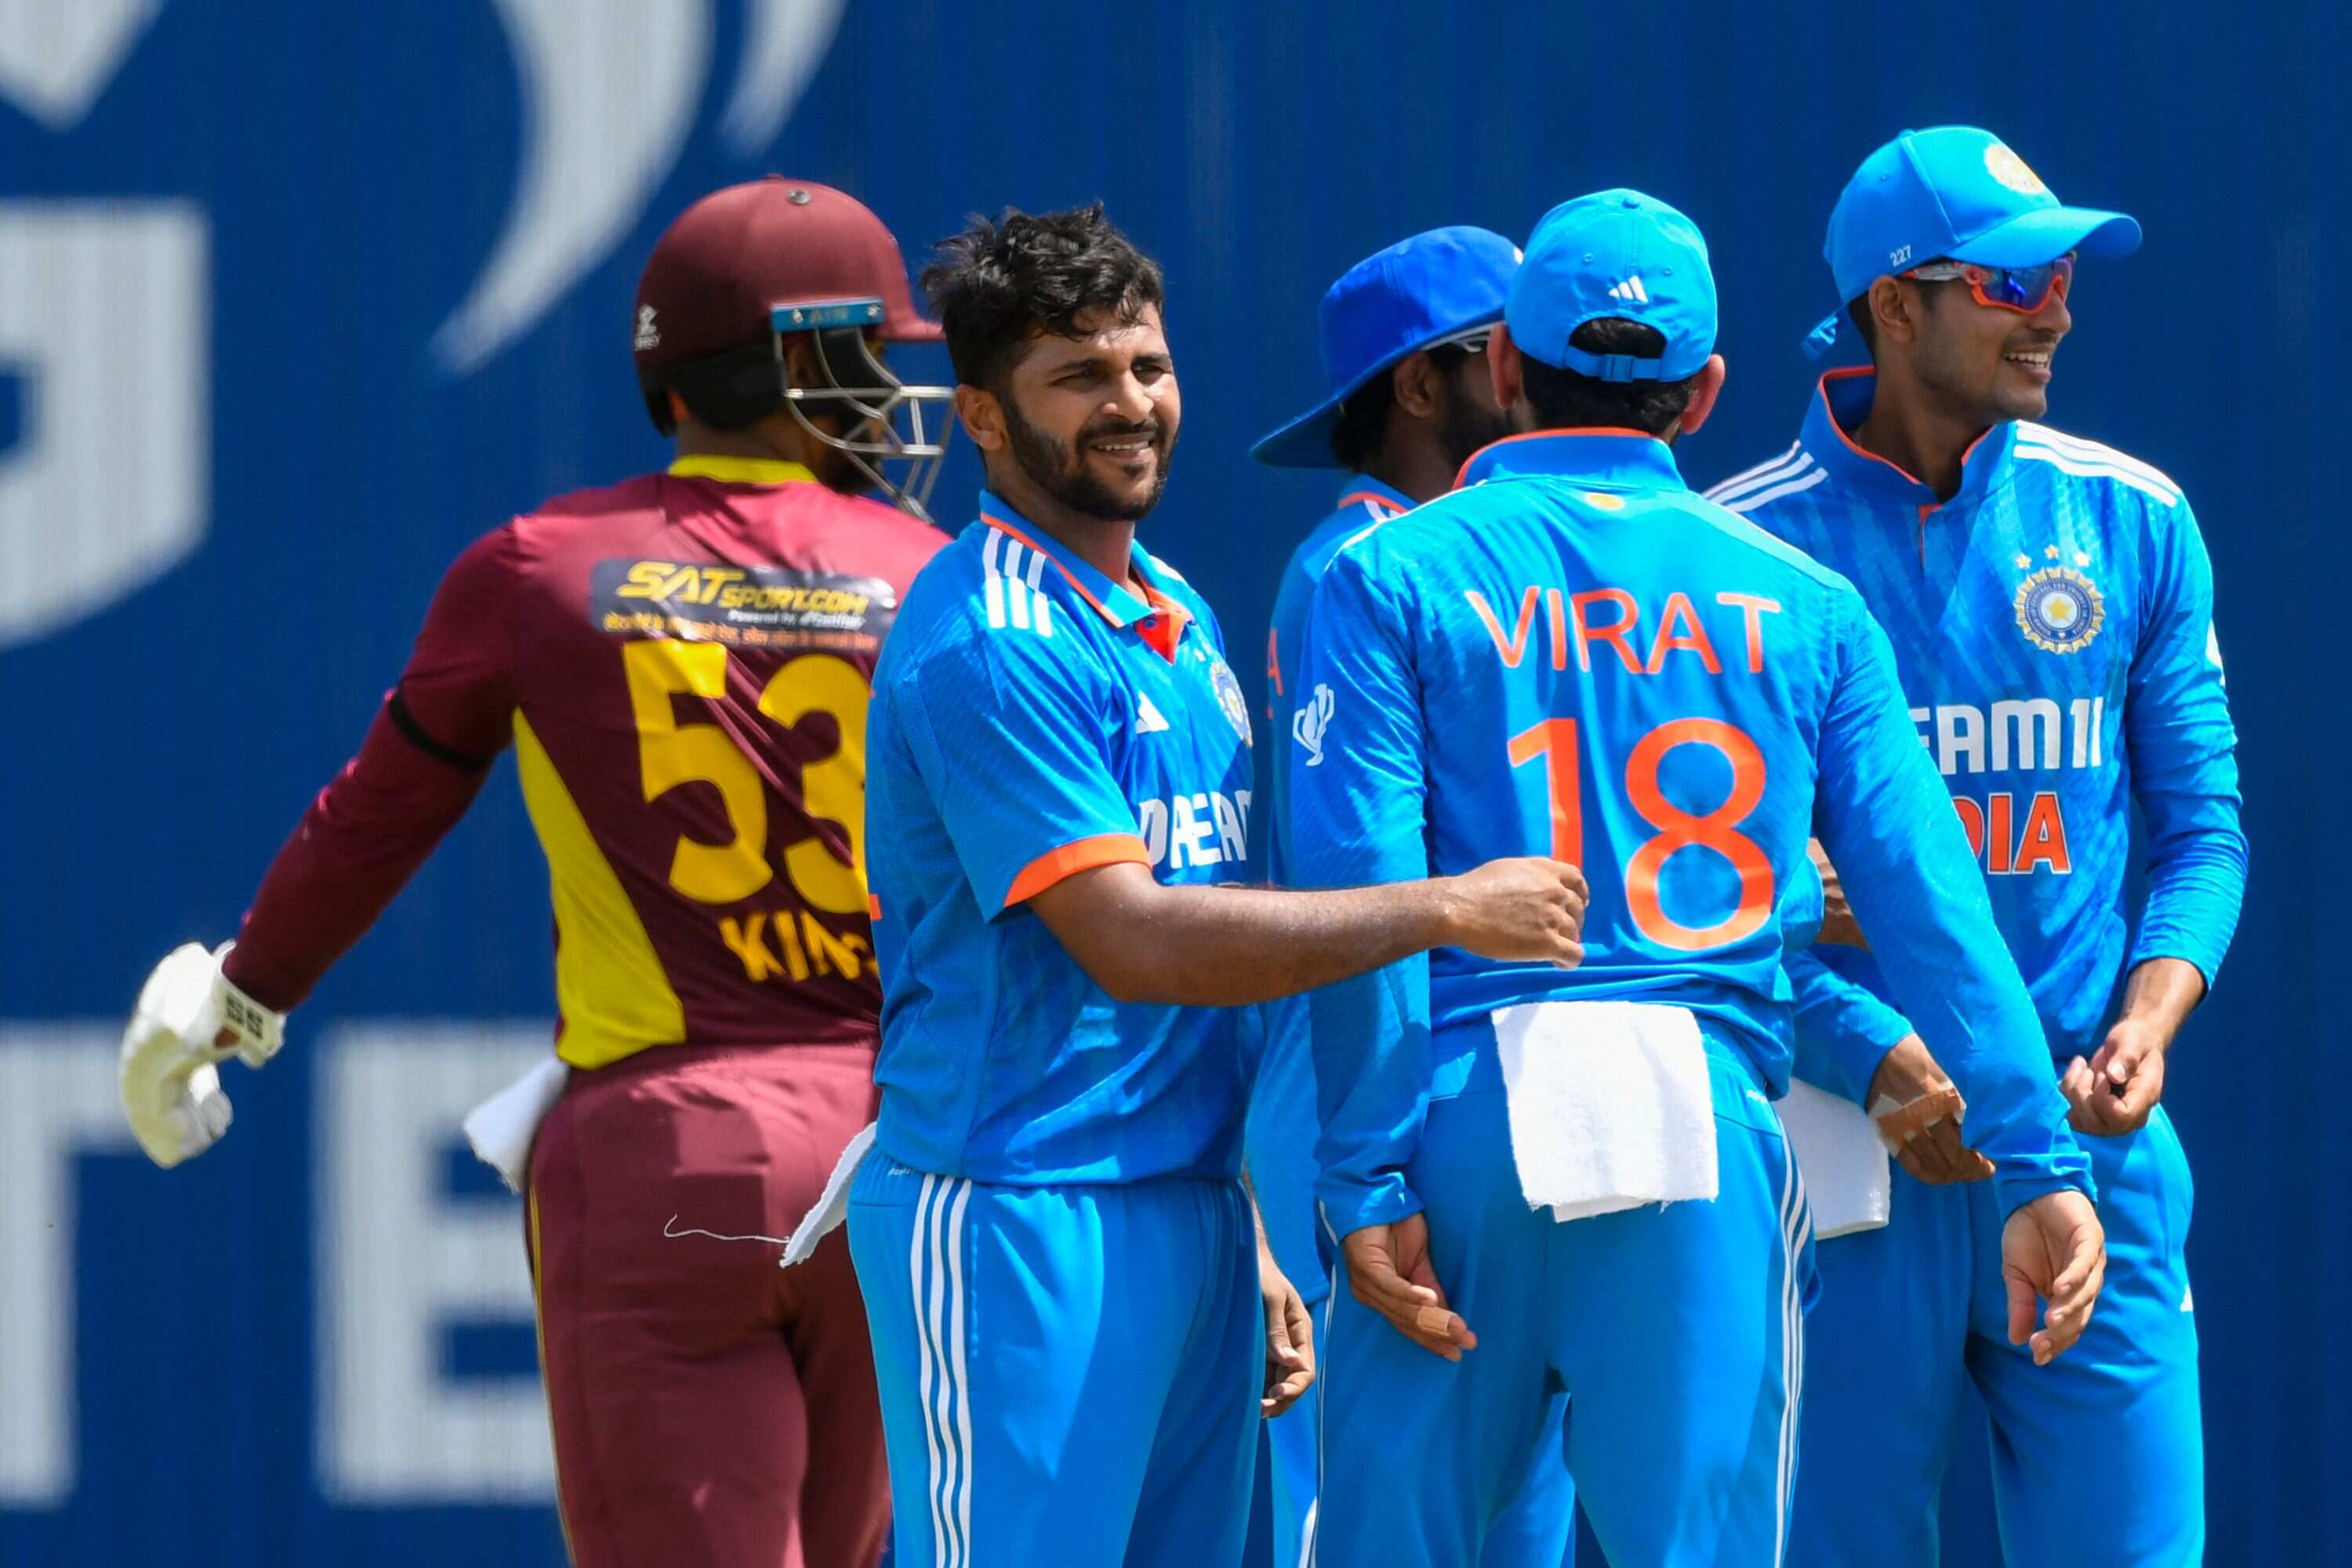 India vs West Indies Free Live Streaming When and where to watch IND vs WI 2nd ODI on TV, Mobile Apps 1st ODI recap Zee Business